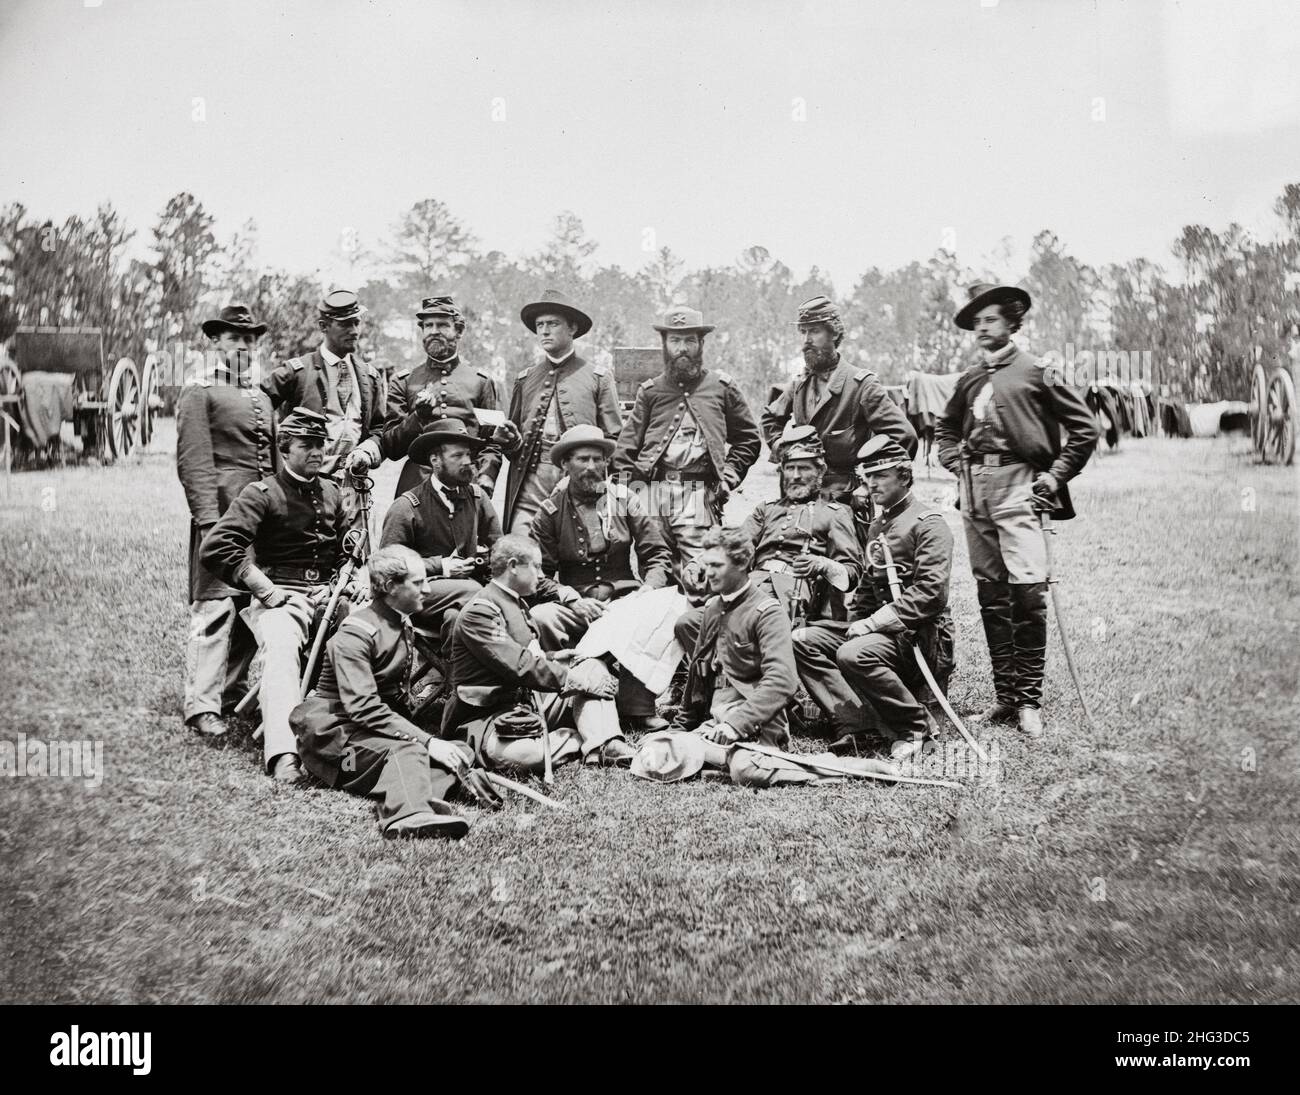 American Civil War, 1861-1865. The Peninsular Campaign. Brigade officers of the Horse Artillery commanded by Lt. Col. William Hays. Fair Oaks, Virgini Stock Photo